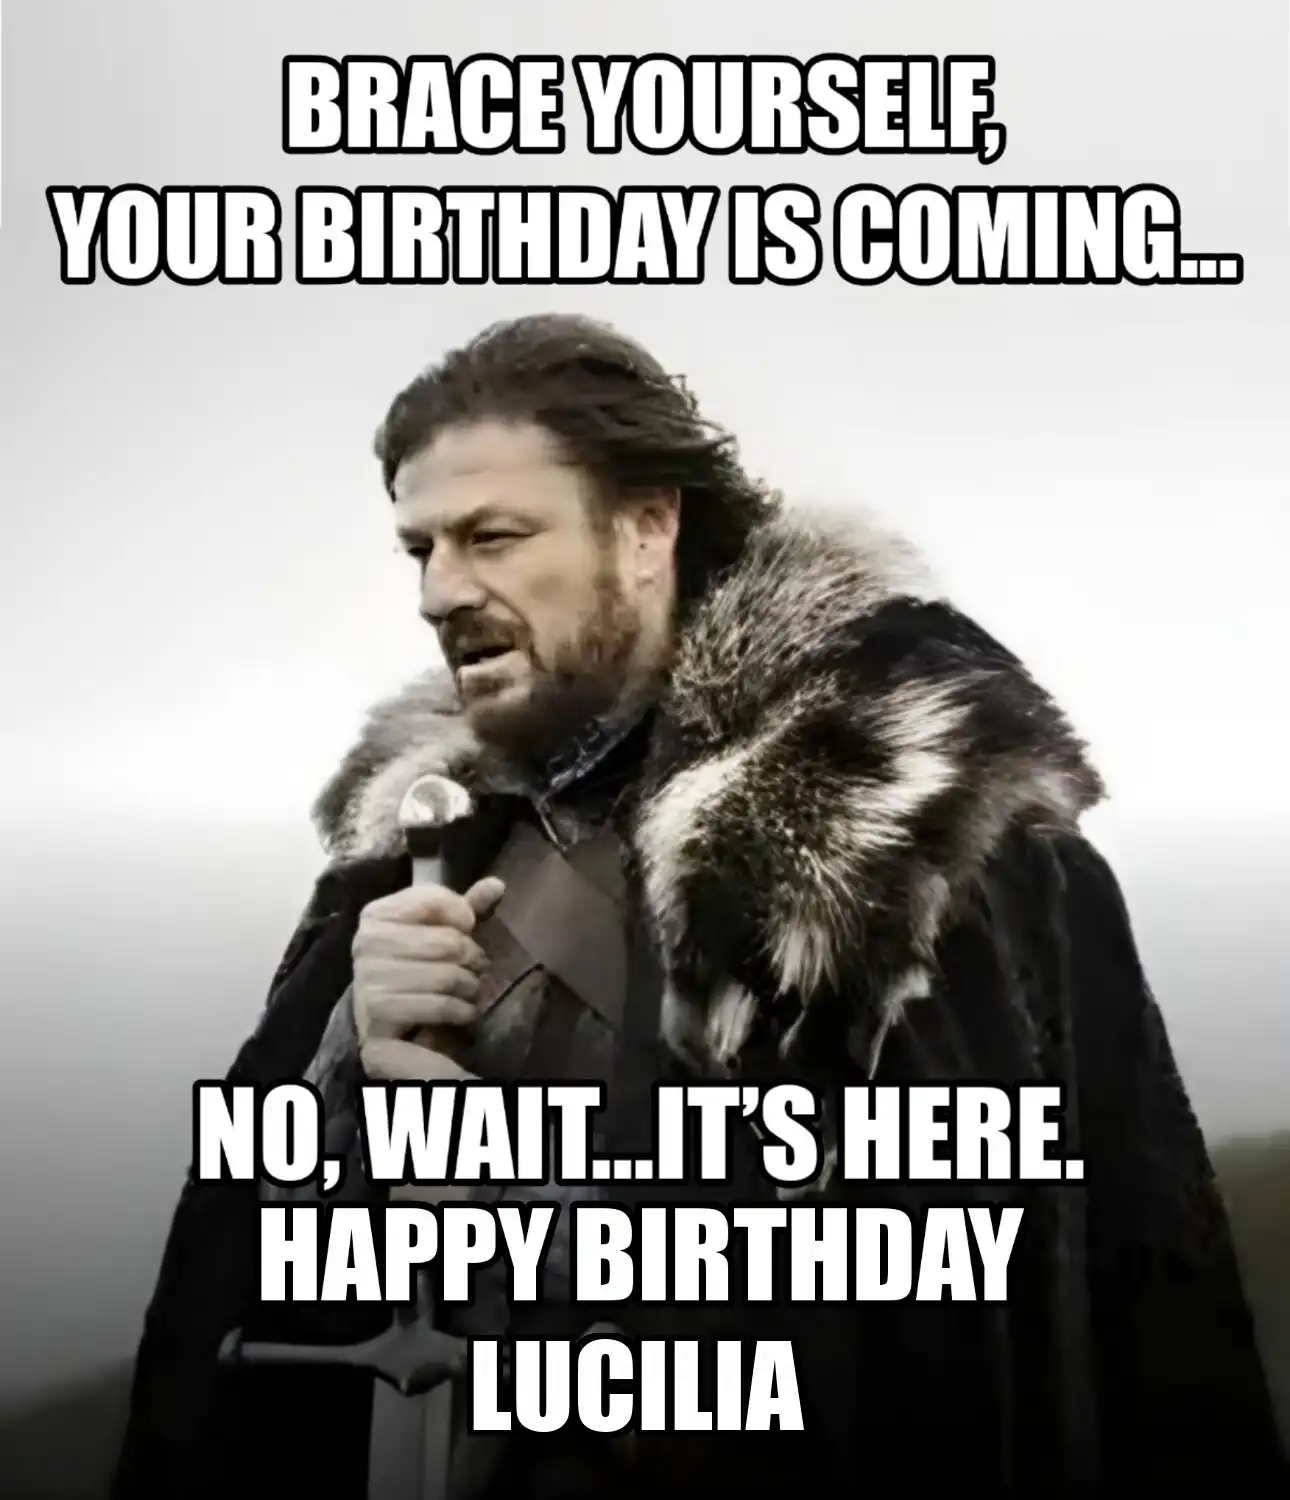 Happy Birthday Lucilia Brace Yourself Your Birthday Is Coming Meme